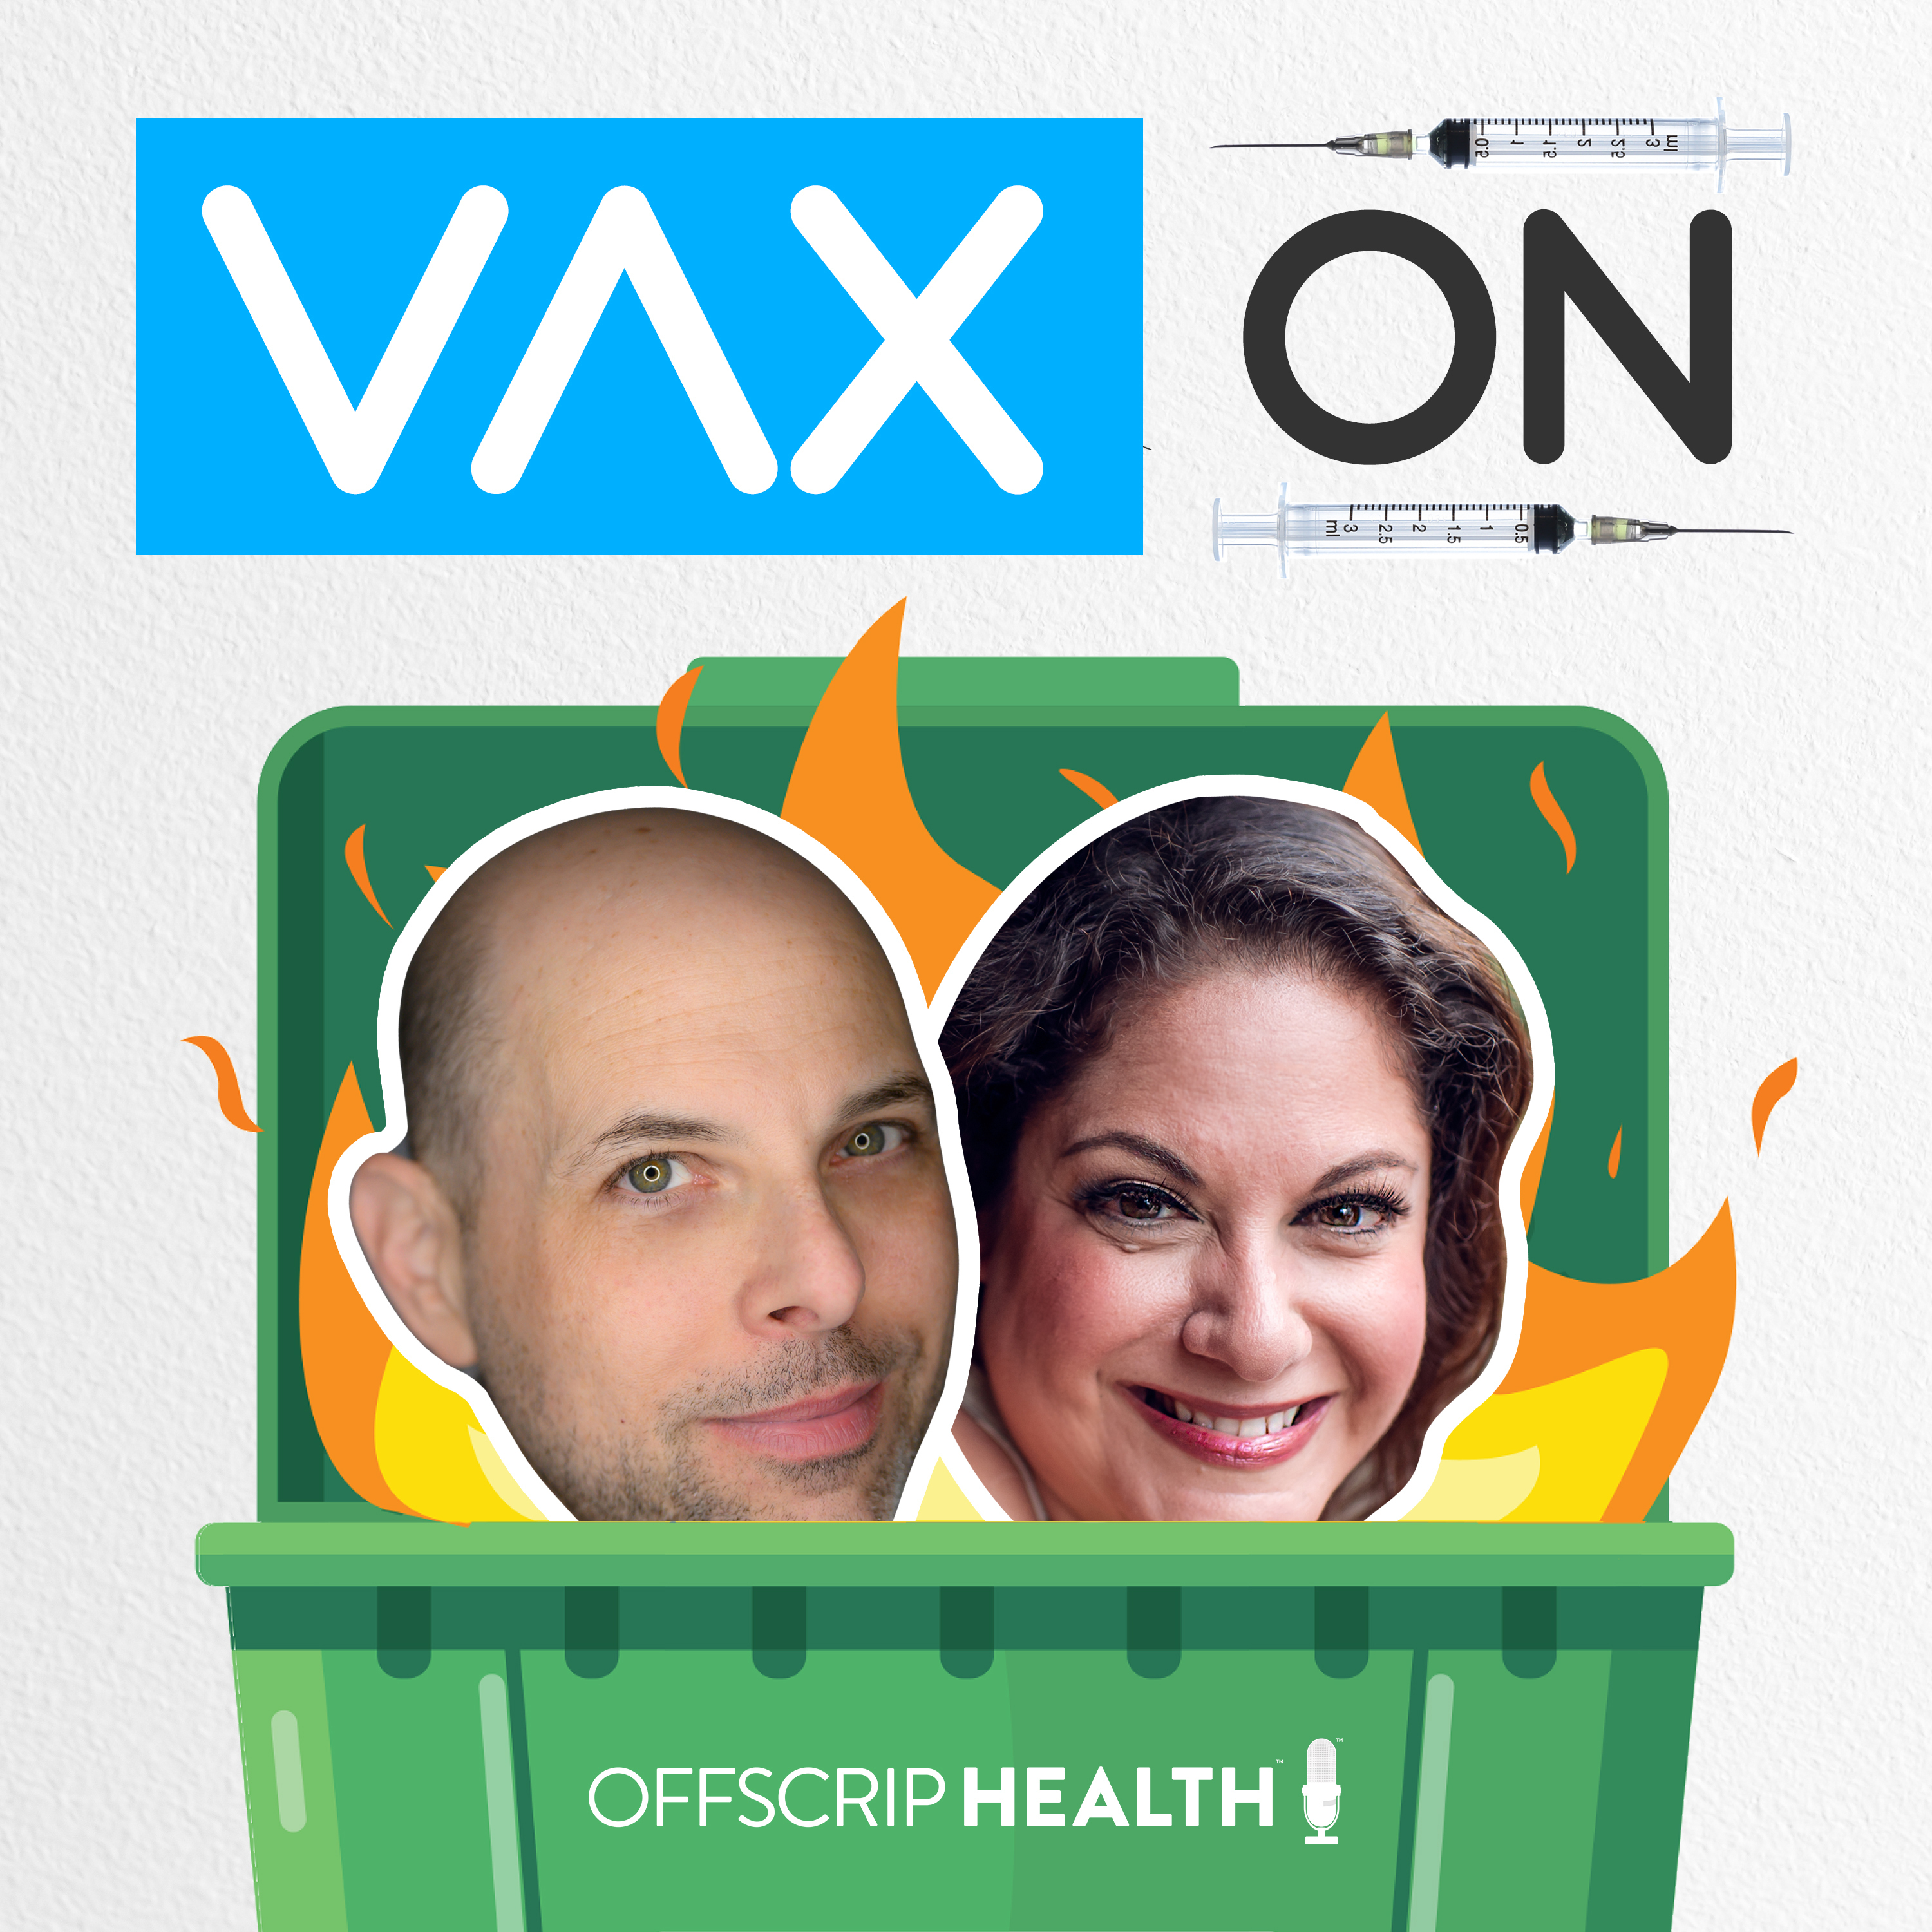 Vax On: Don’t Vax, Don’t Tell, No Rogan, and the Novastans